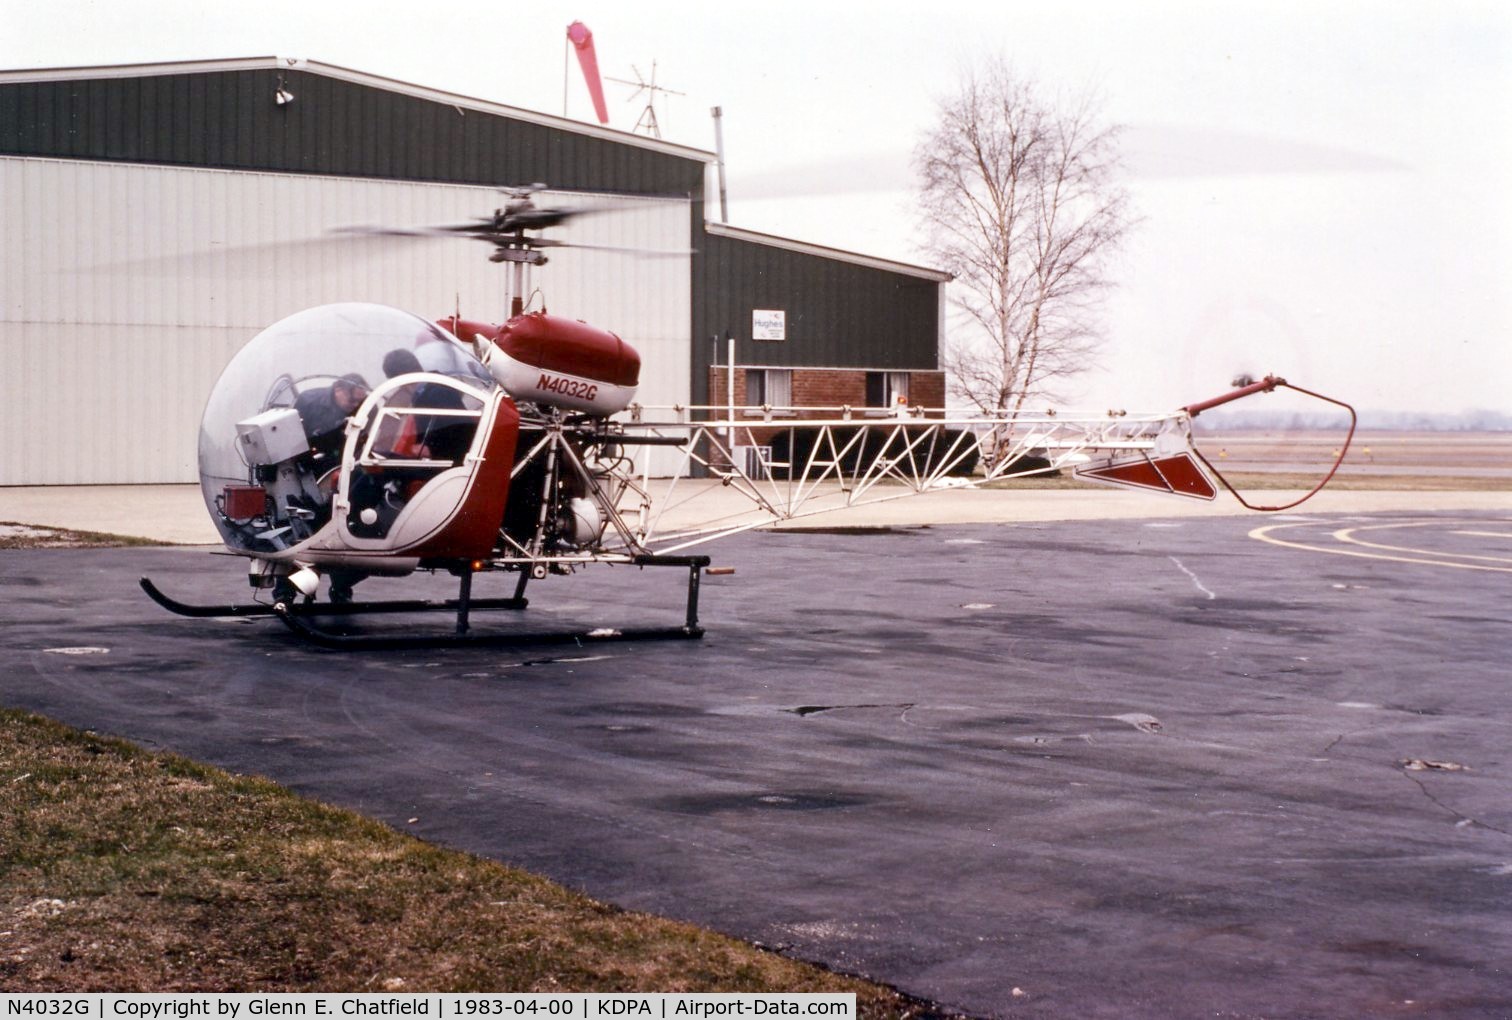 N4032G, 1968 Bell 47G-4A C/N 7618, Chicago Fire Department's.  Photo taken for aircraft recognition training